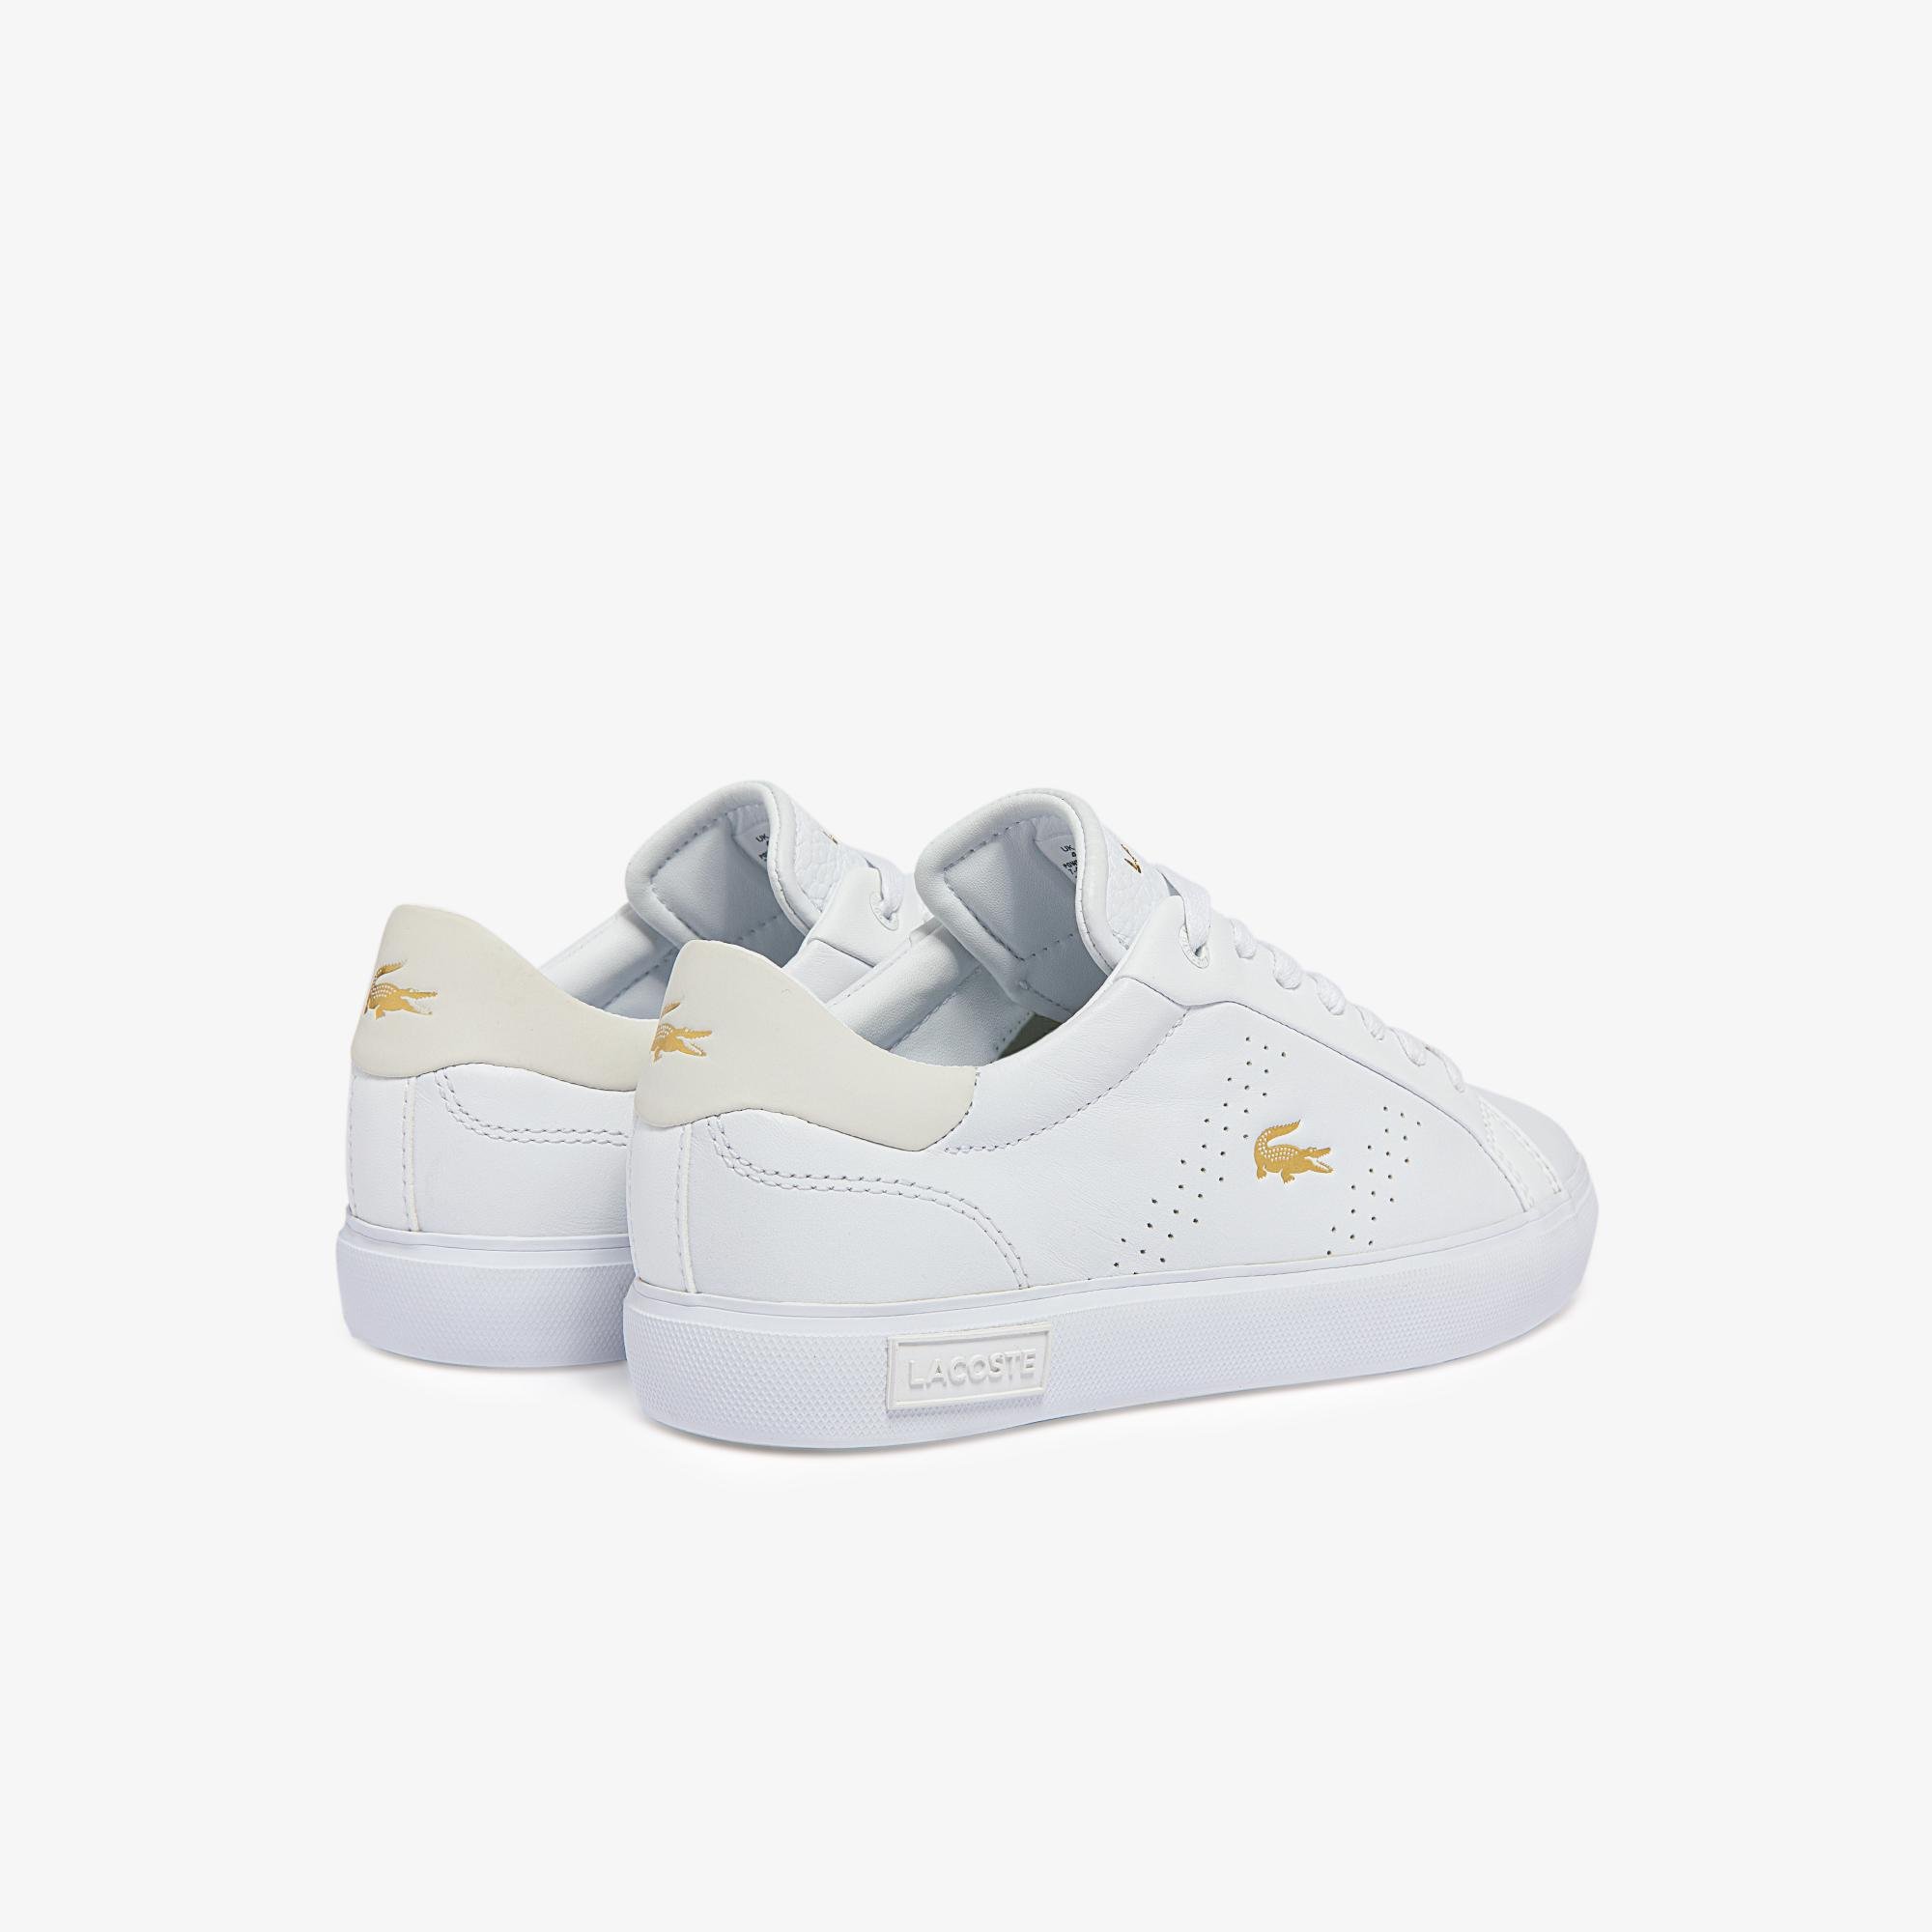 Lacoste Women's Powercourt 2.0 Leather Tonal Trainers